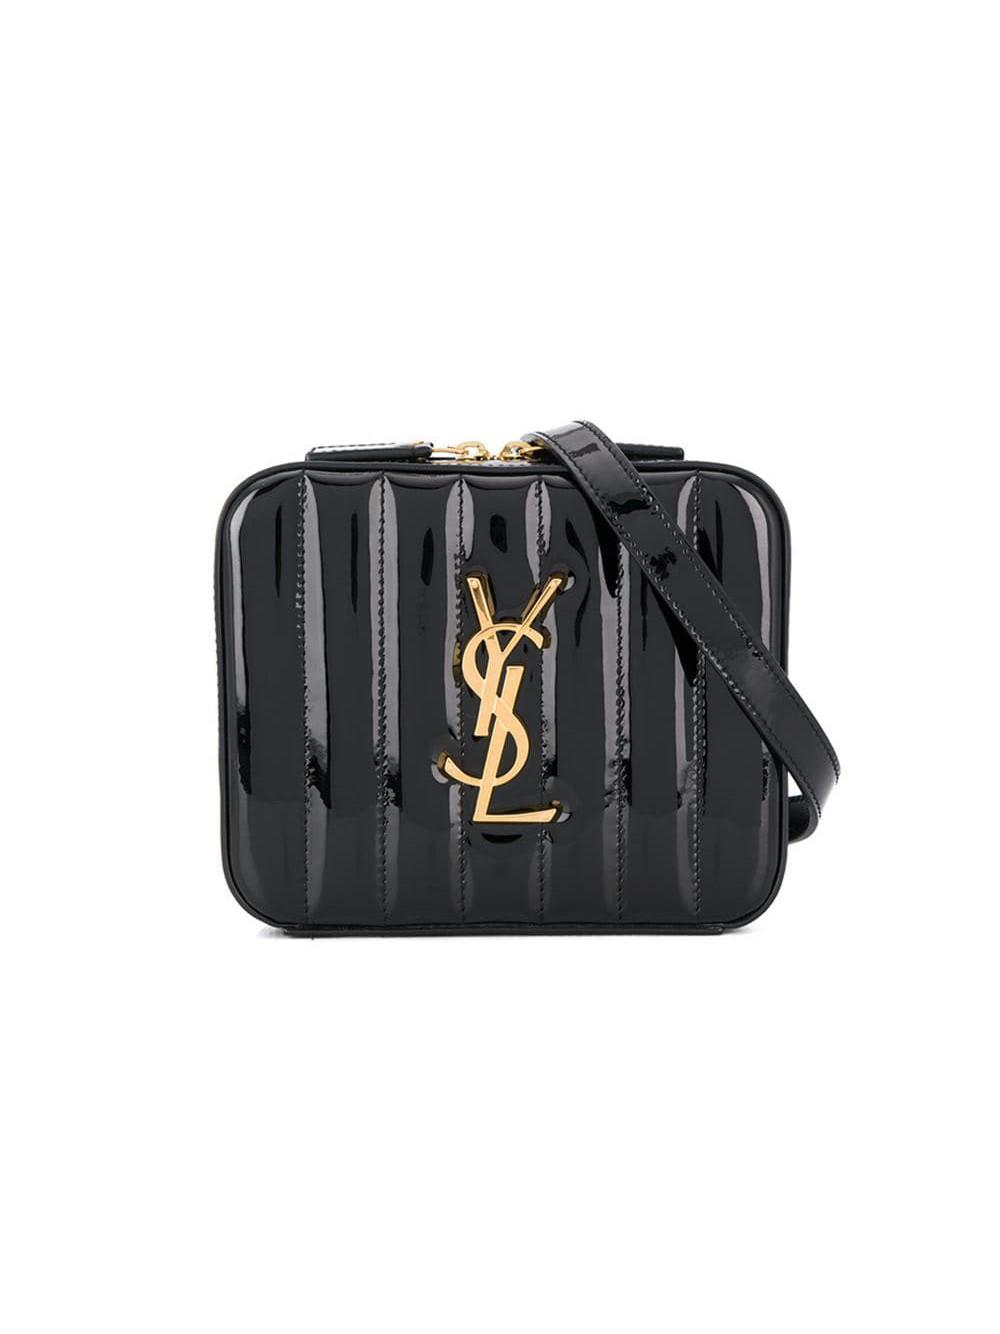 Saint Laurent Ysl Vicky Belt Bag In Quilted Patent Leather in Black - Save 2% - Lyst